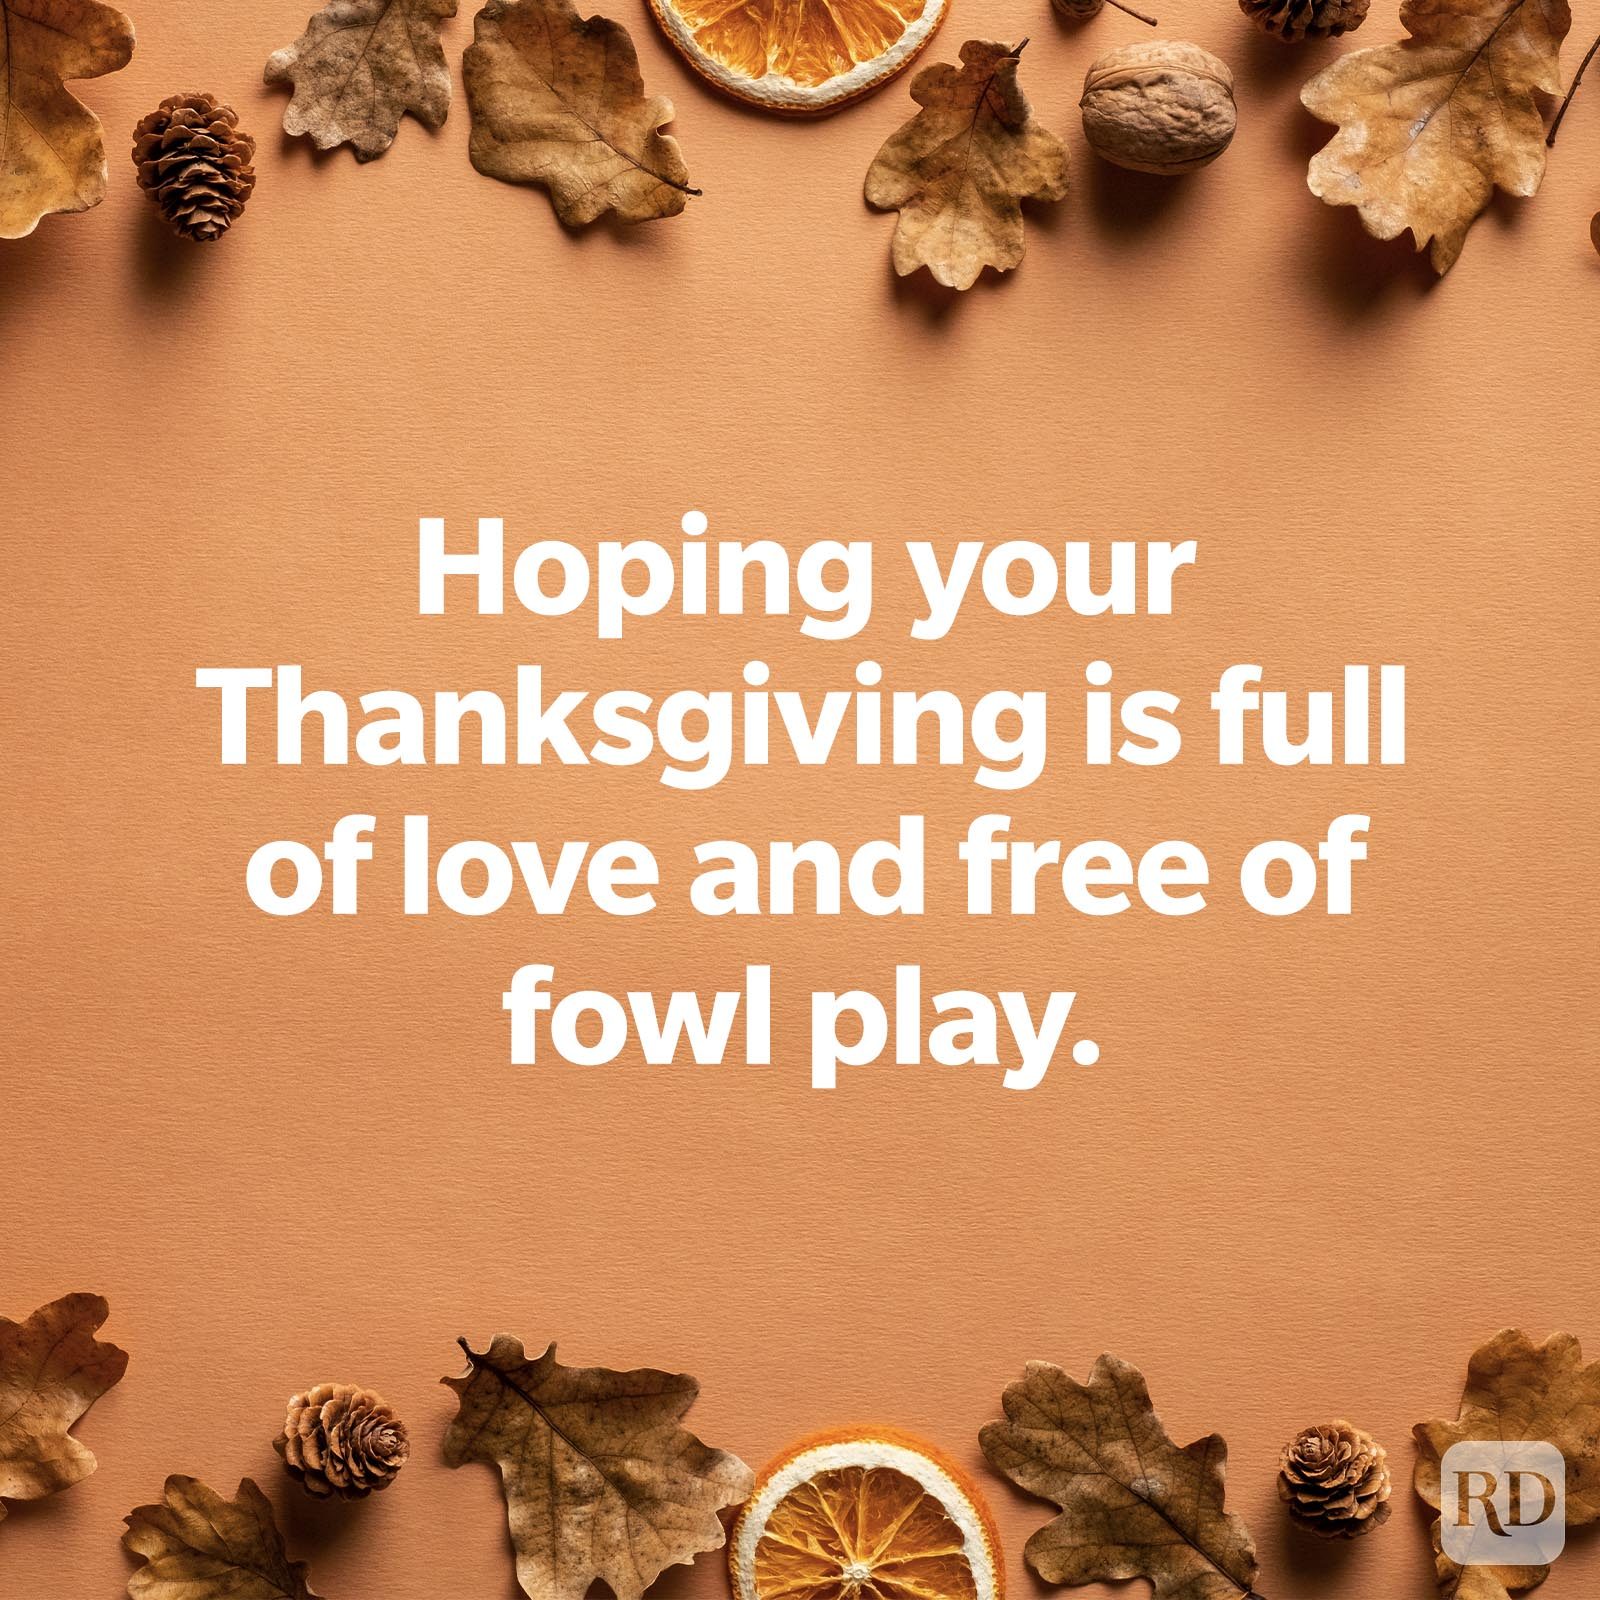 Hoping your Thanksgiving is full of love and free of fowl play.